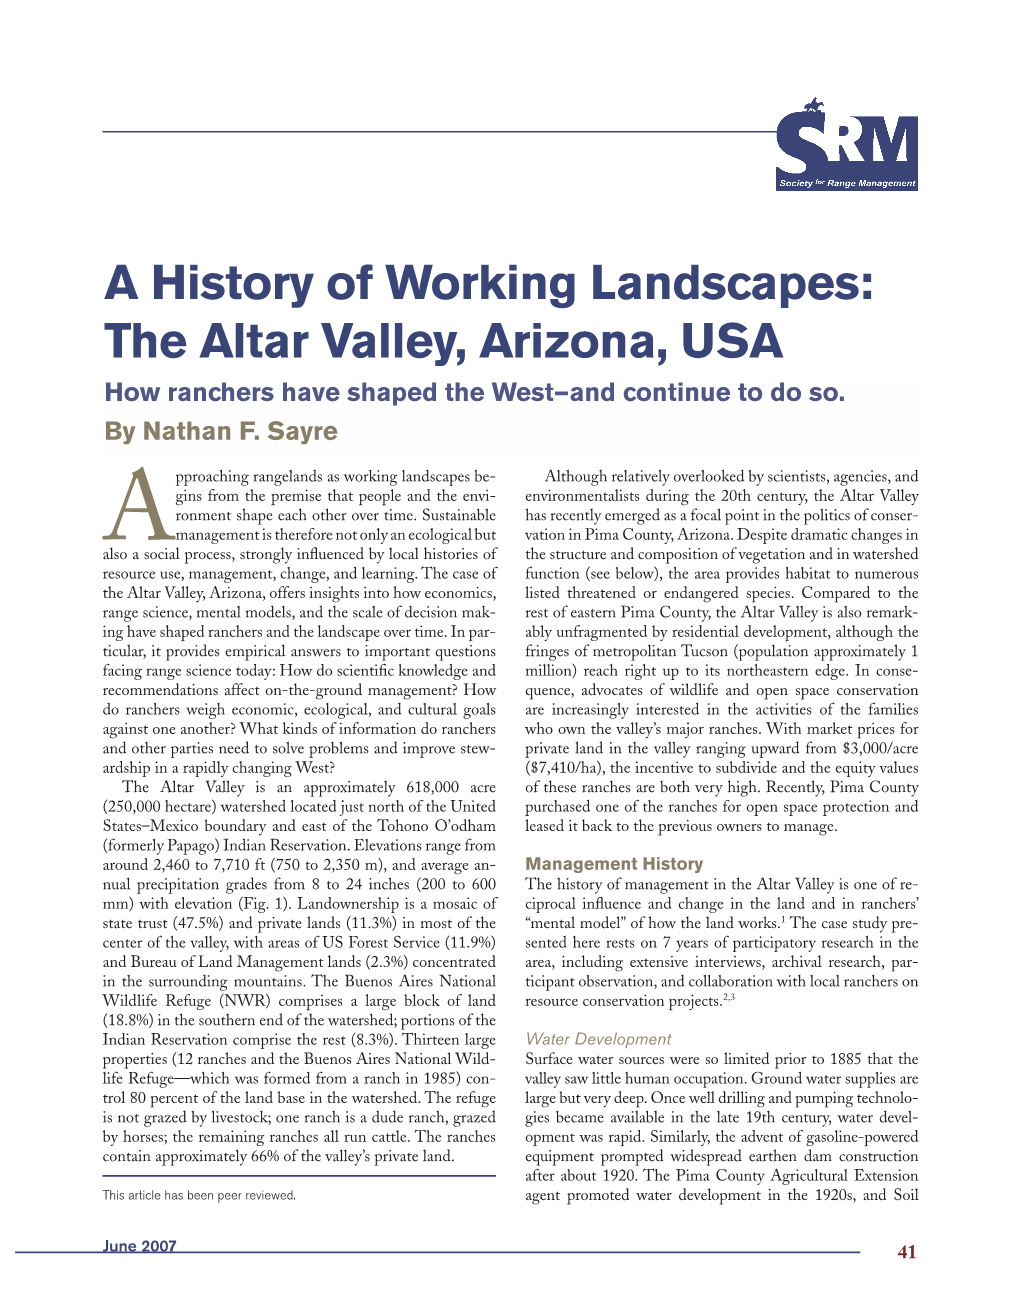 The Altar Valley, Arizona, USA How Ranchers Have Shaped the West—And Continue to Do So